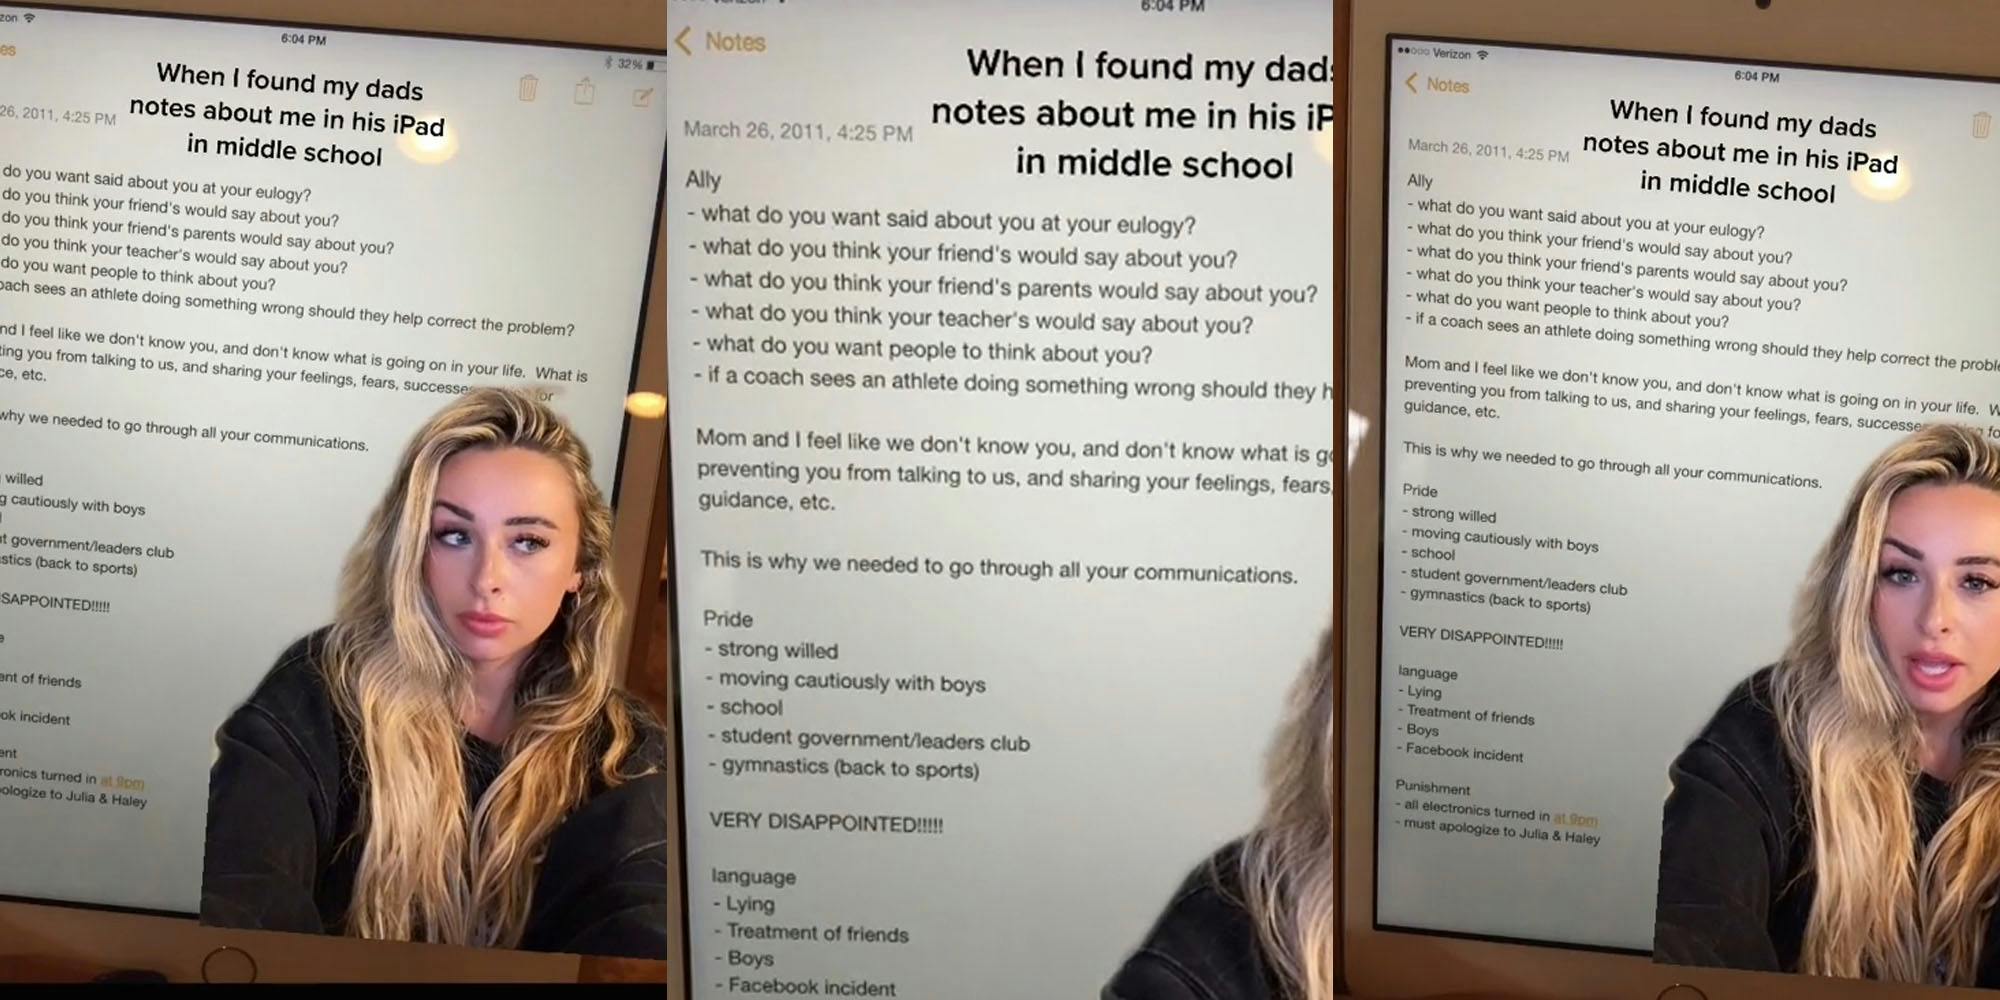 Female greenscreen tiktok video over iPad notes caption " When I found my dad's notes about me in his iPad in middle school" (l) naughty list on iPad screen caption " When I found my dad's notes about me in his iPad in middle school"(c) female greenscreen over iPad notes caption " When I found my dad's notes about me in his iPad in middle school"(r)